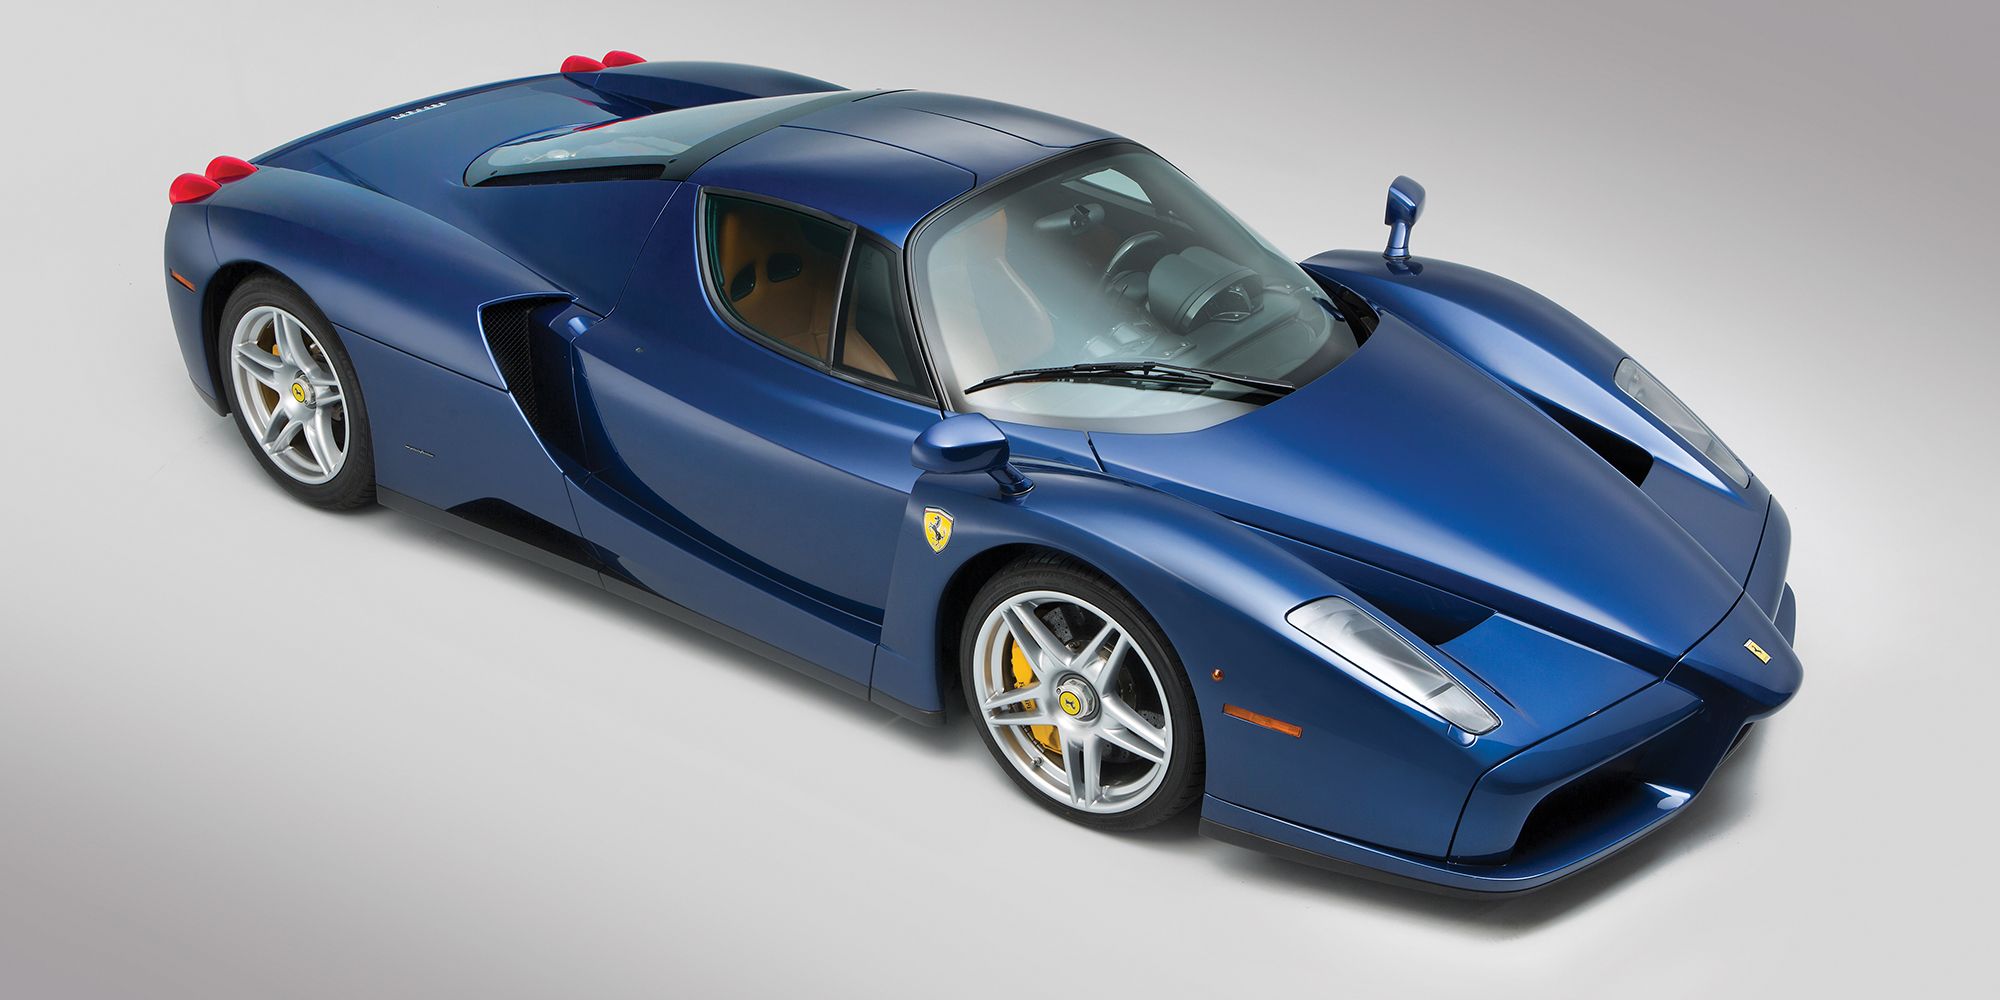 This Tour De France Blue Ferrari Enzo Is Lovely And Can Be Yours